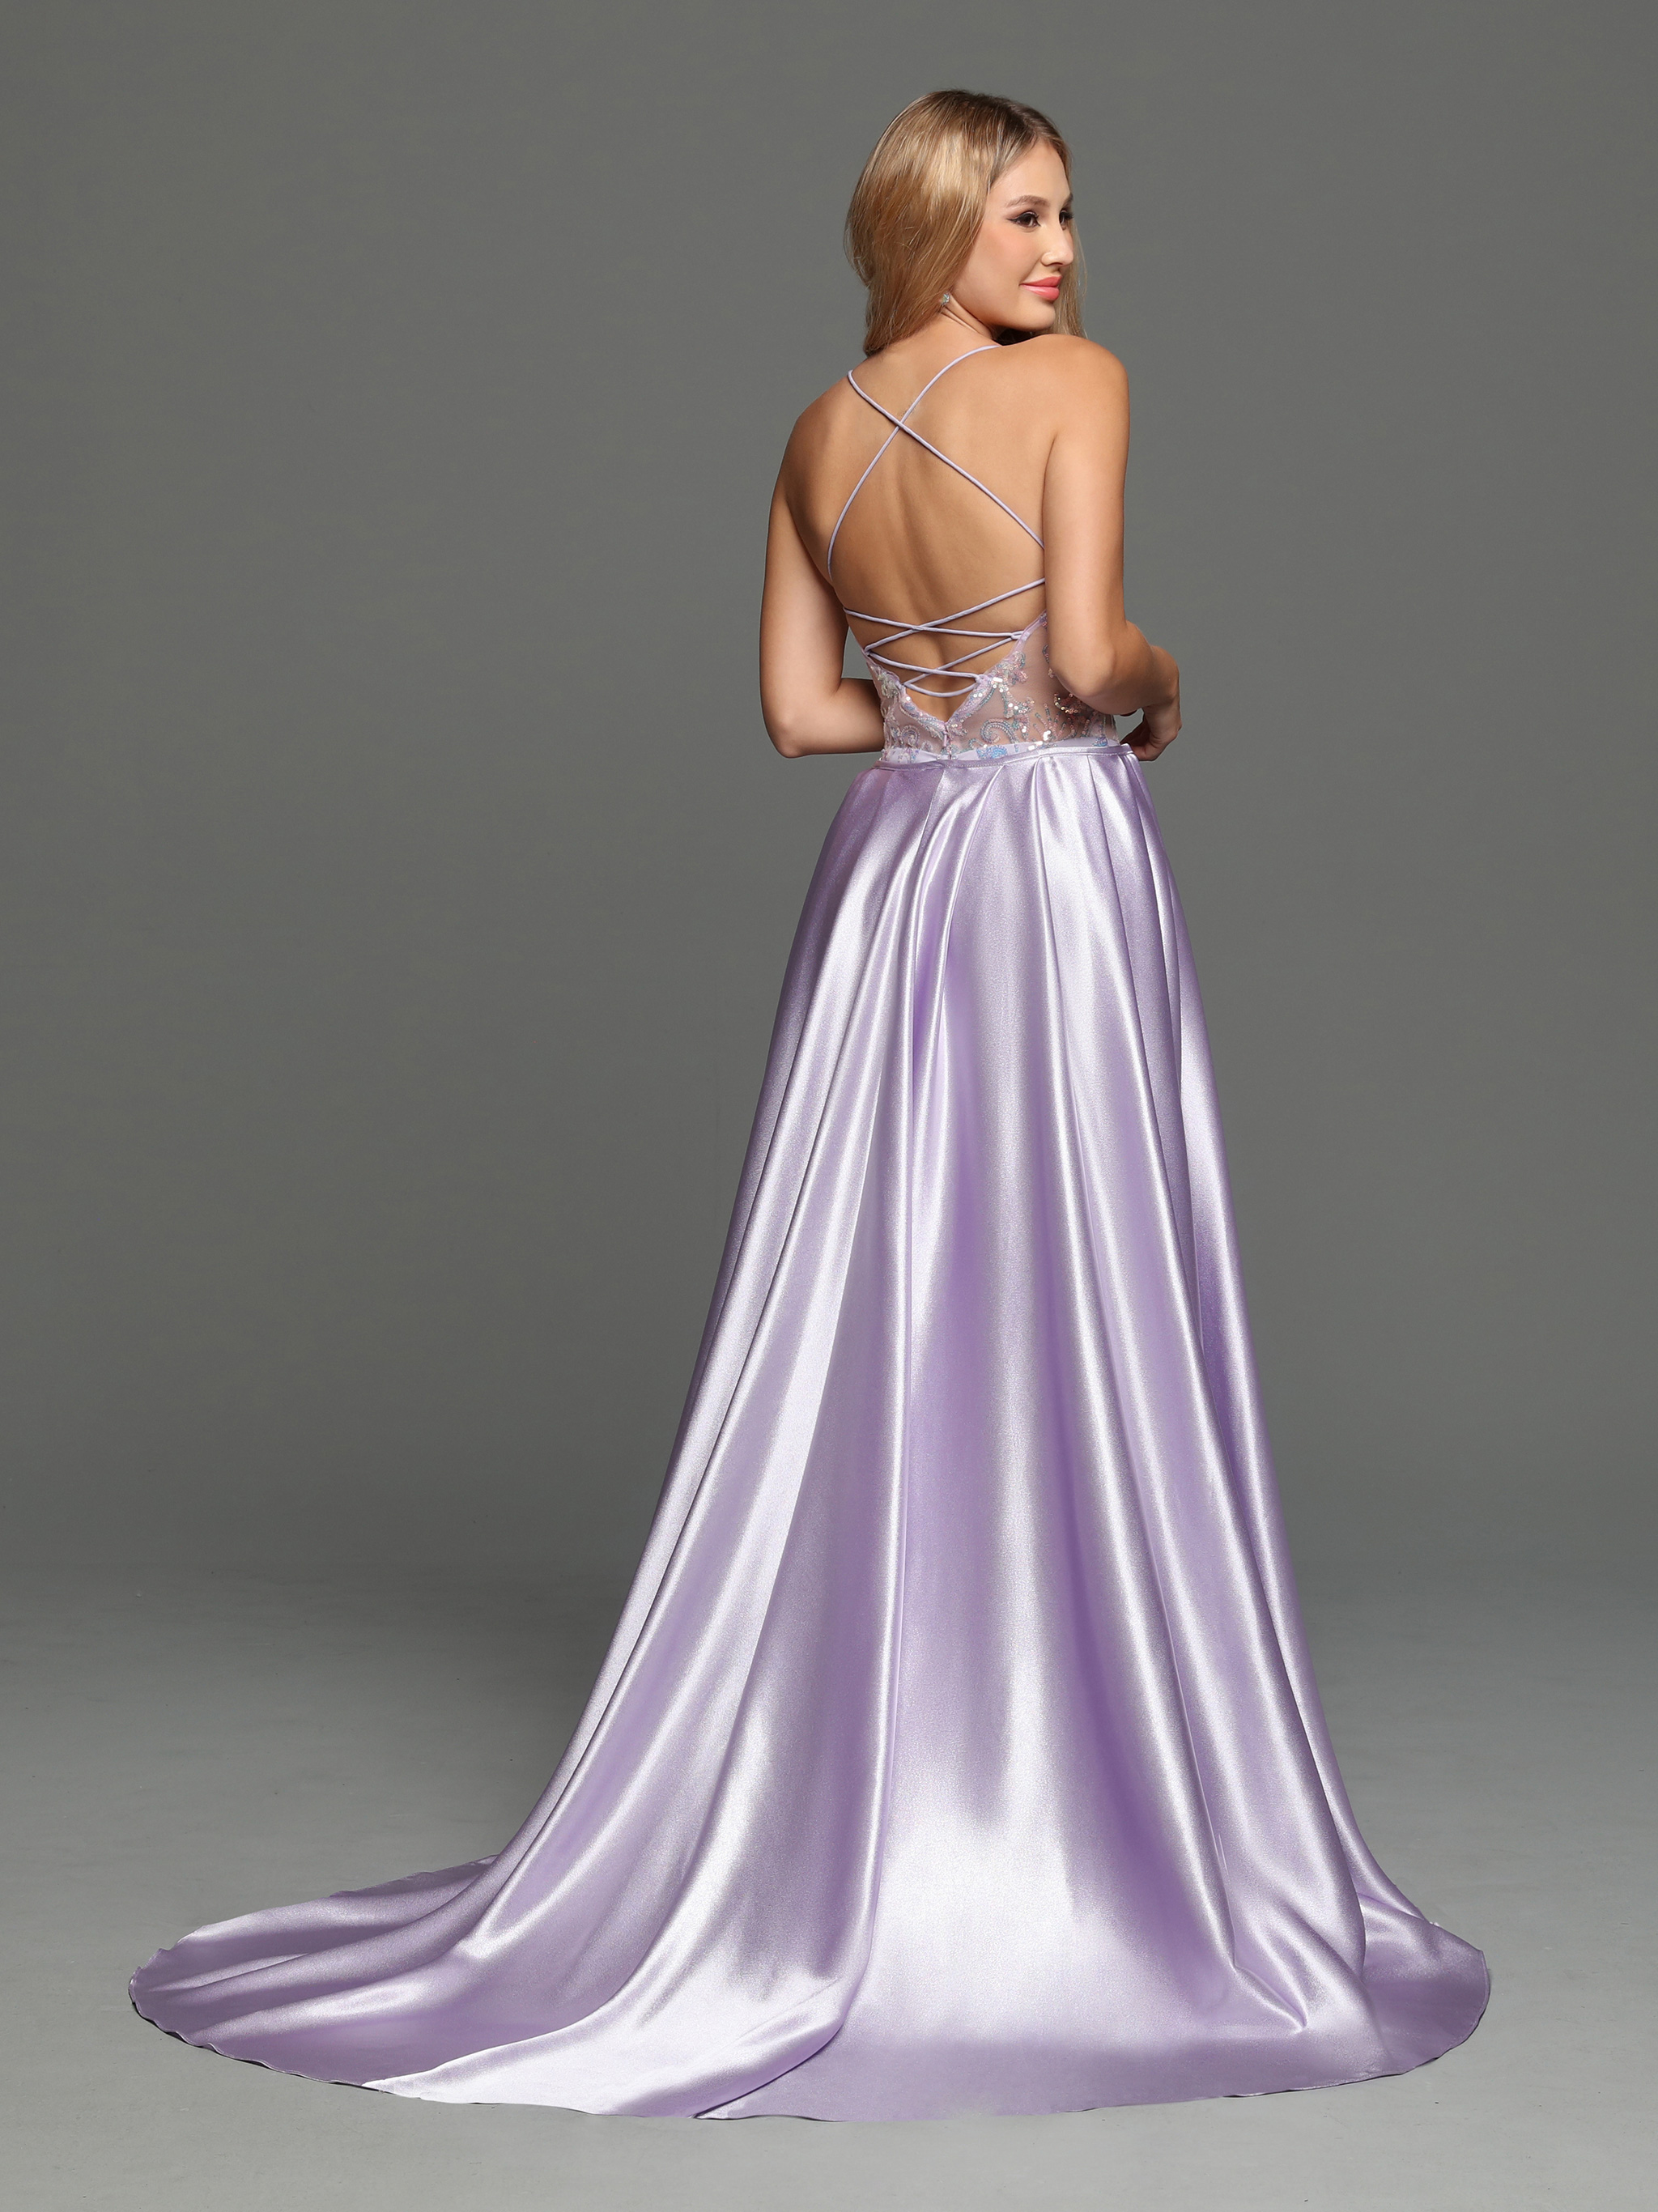 Image showing back view of style #72233